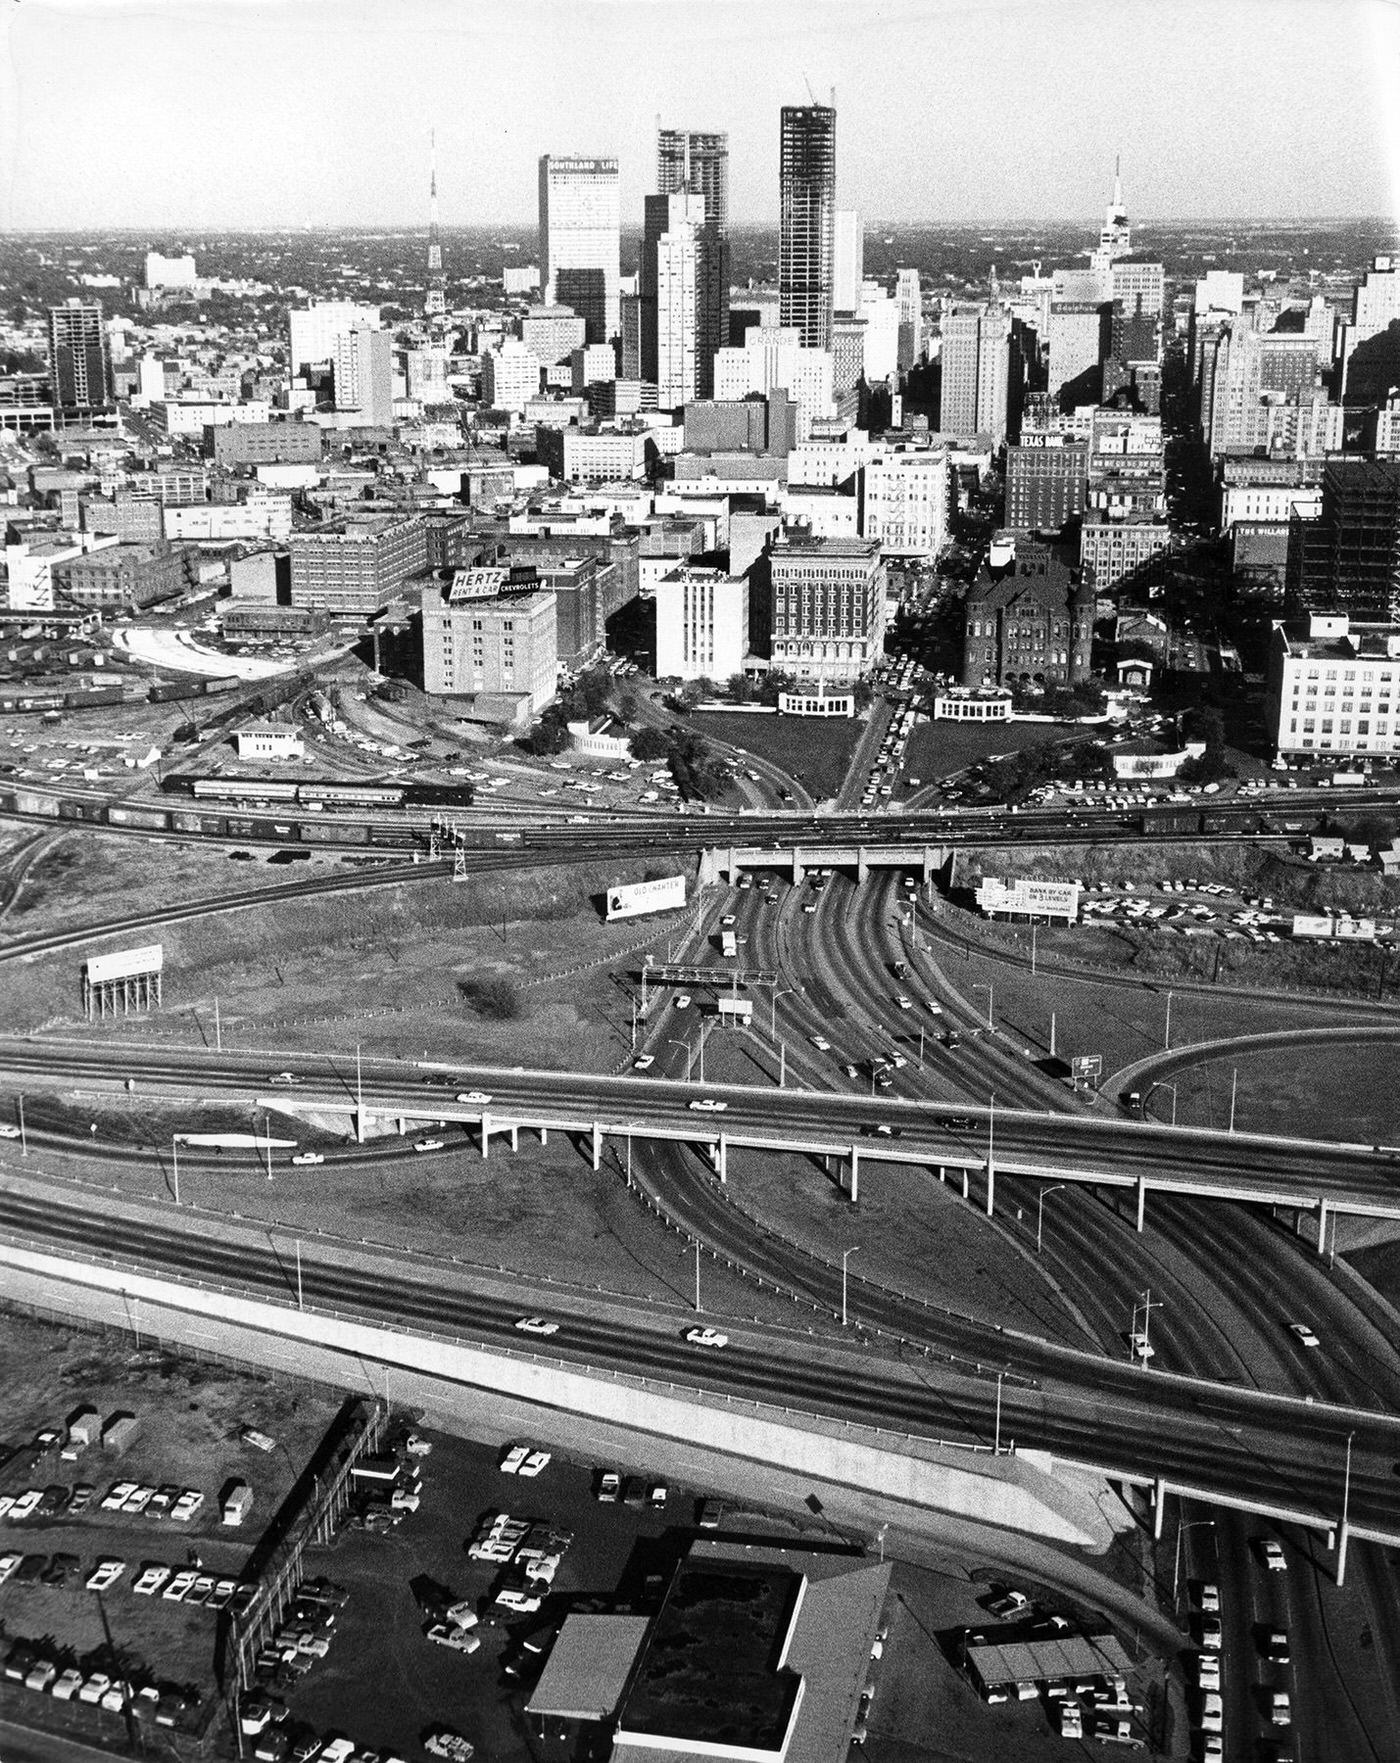 A skyline view of Dallas showing Dealey Plaza, triple underpass, Texas School Book Depository building after assassination of President John F. Kennedy, 1963